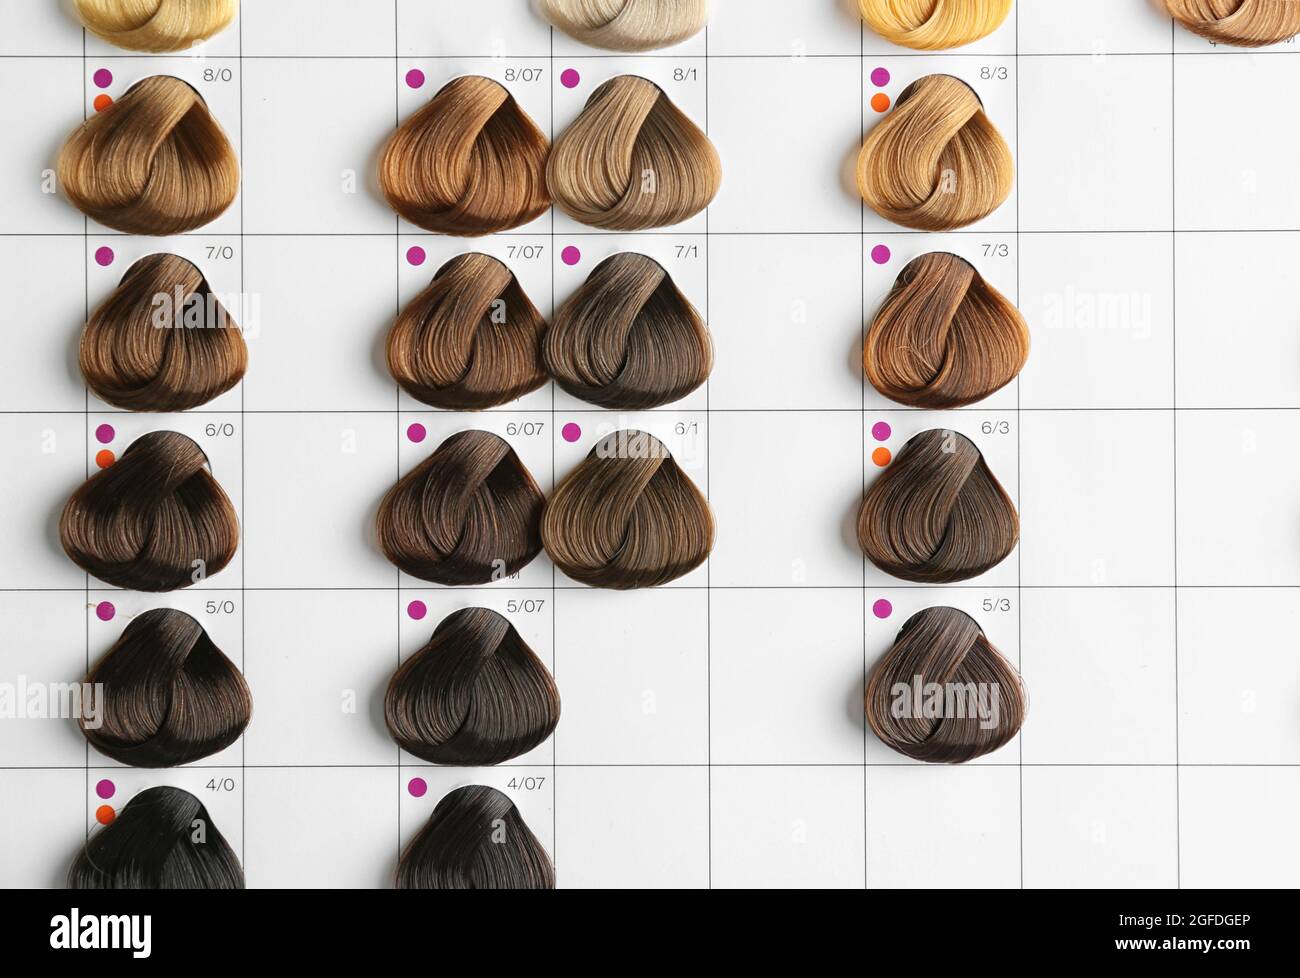 12400 Hair Color Chart Stock Photos Pictures  RoyaltyFree Images   iStock  Hair dye Hair swatches Hair salon